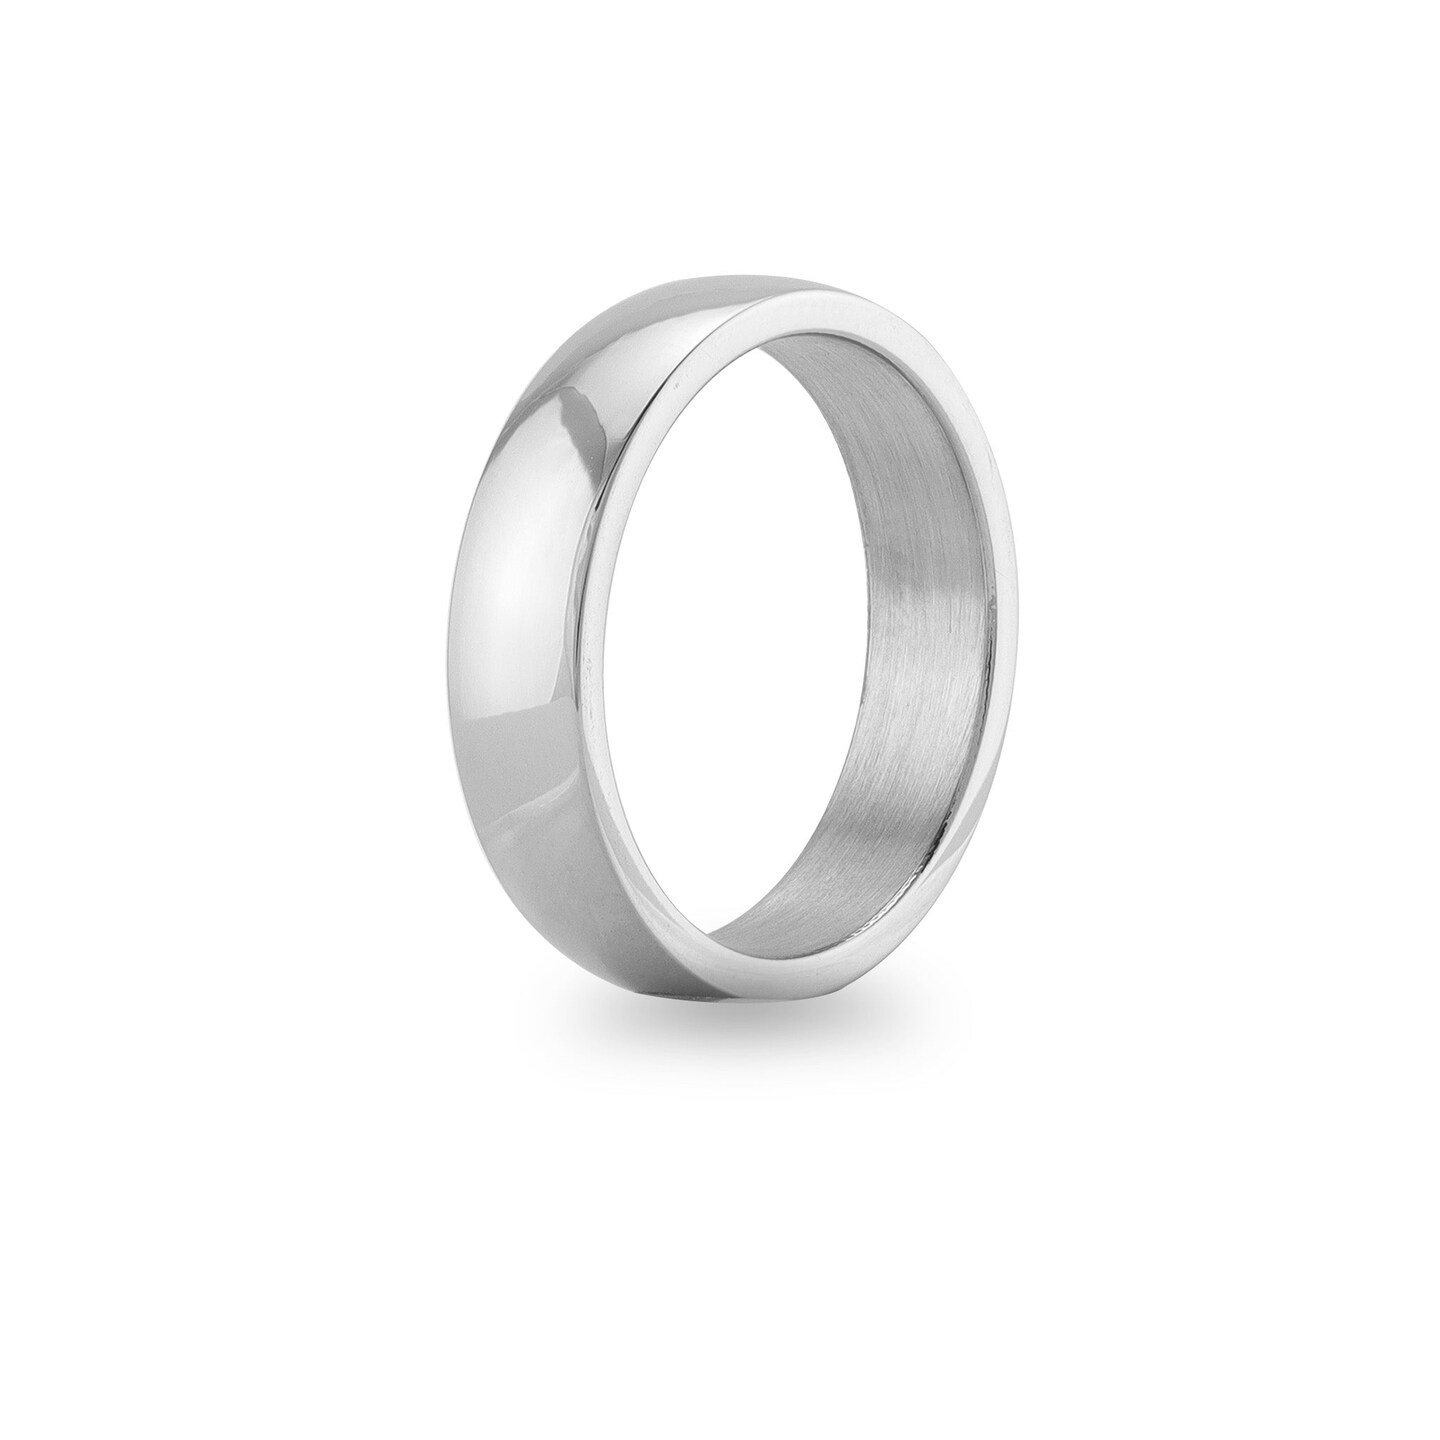 Polished Stainless Steel Blank Ring